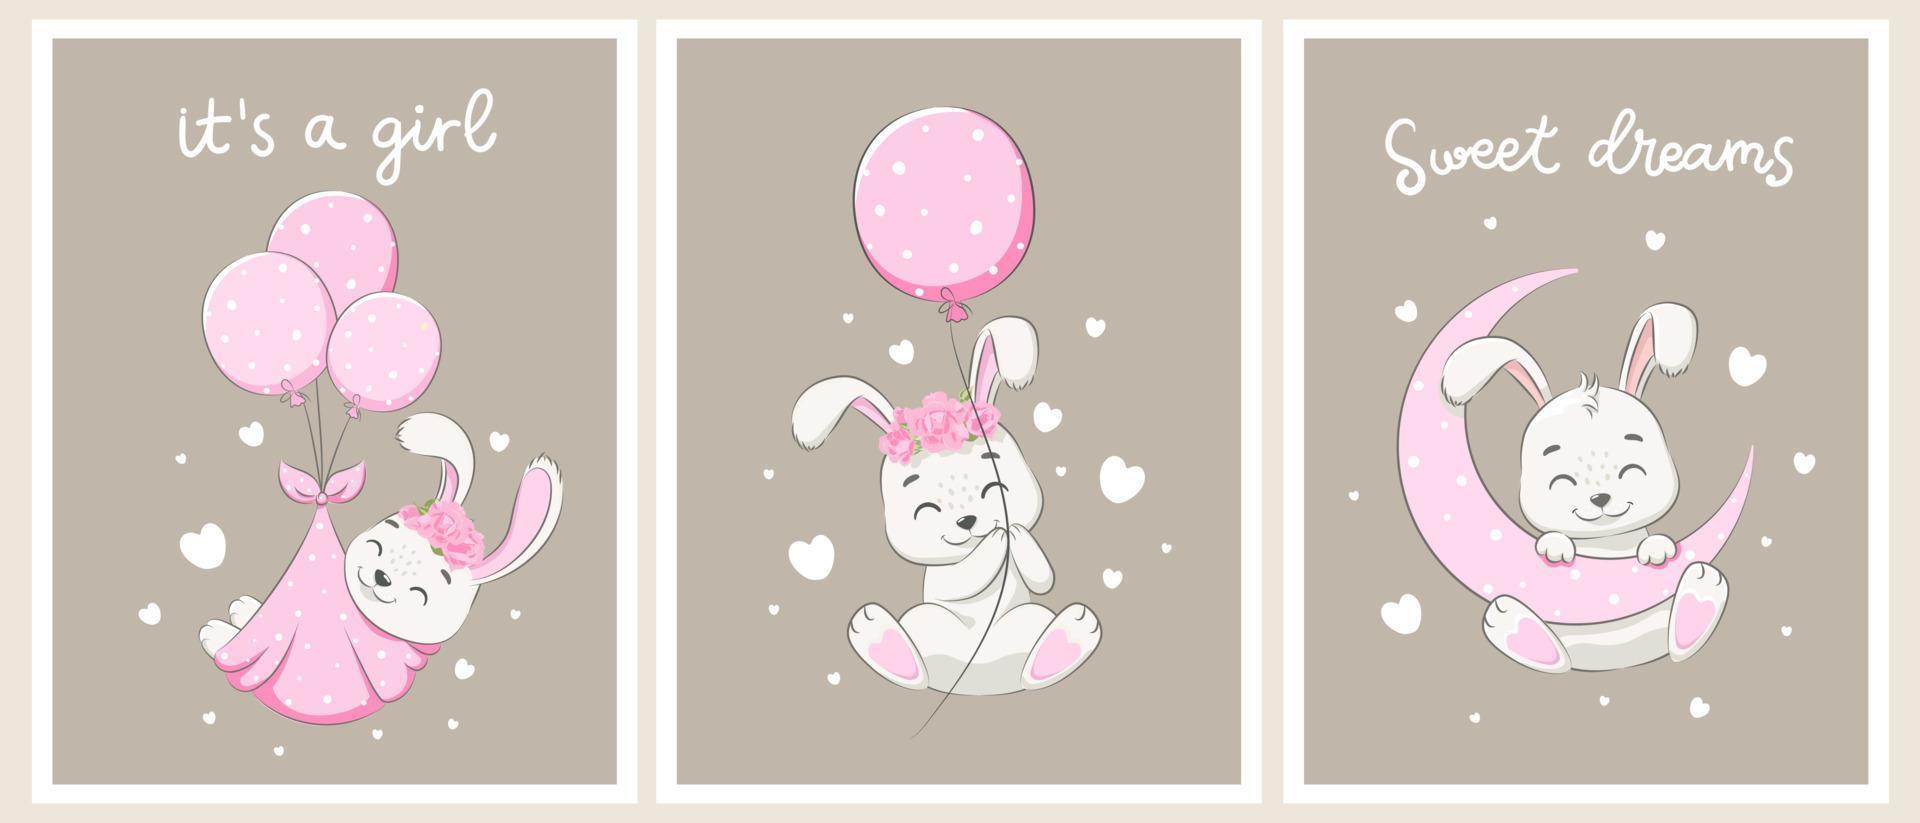 A set of cute rabbits for a girl. Sweet dreams,the moon, flowers and hot air balloon flights. Vector illustration of a cartoon.